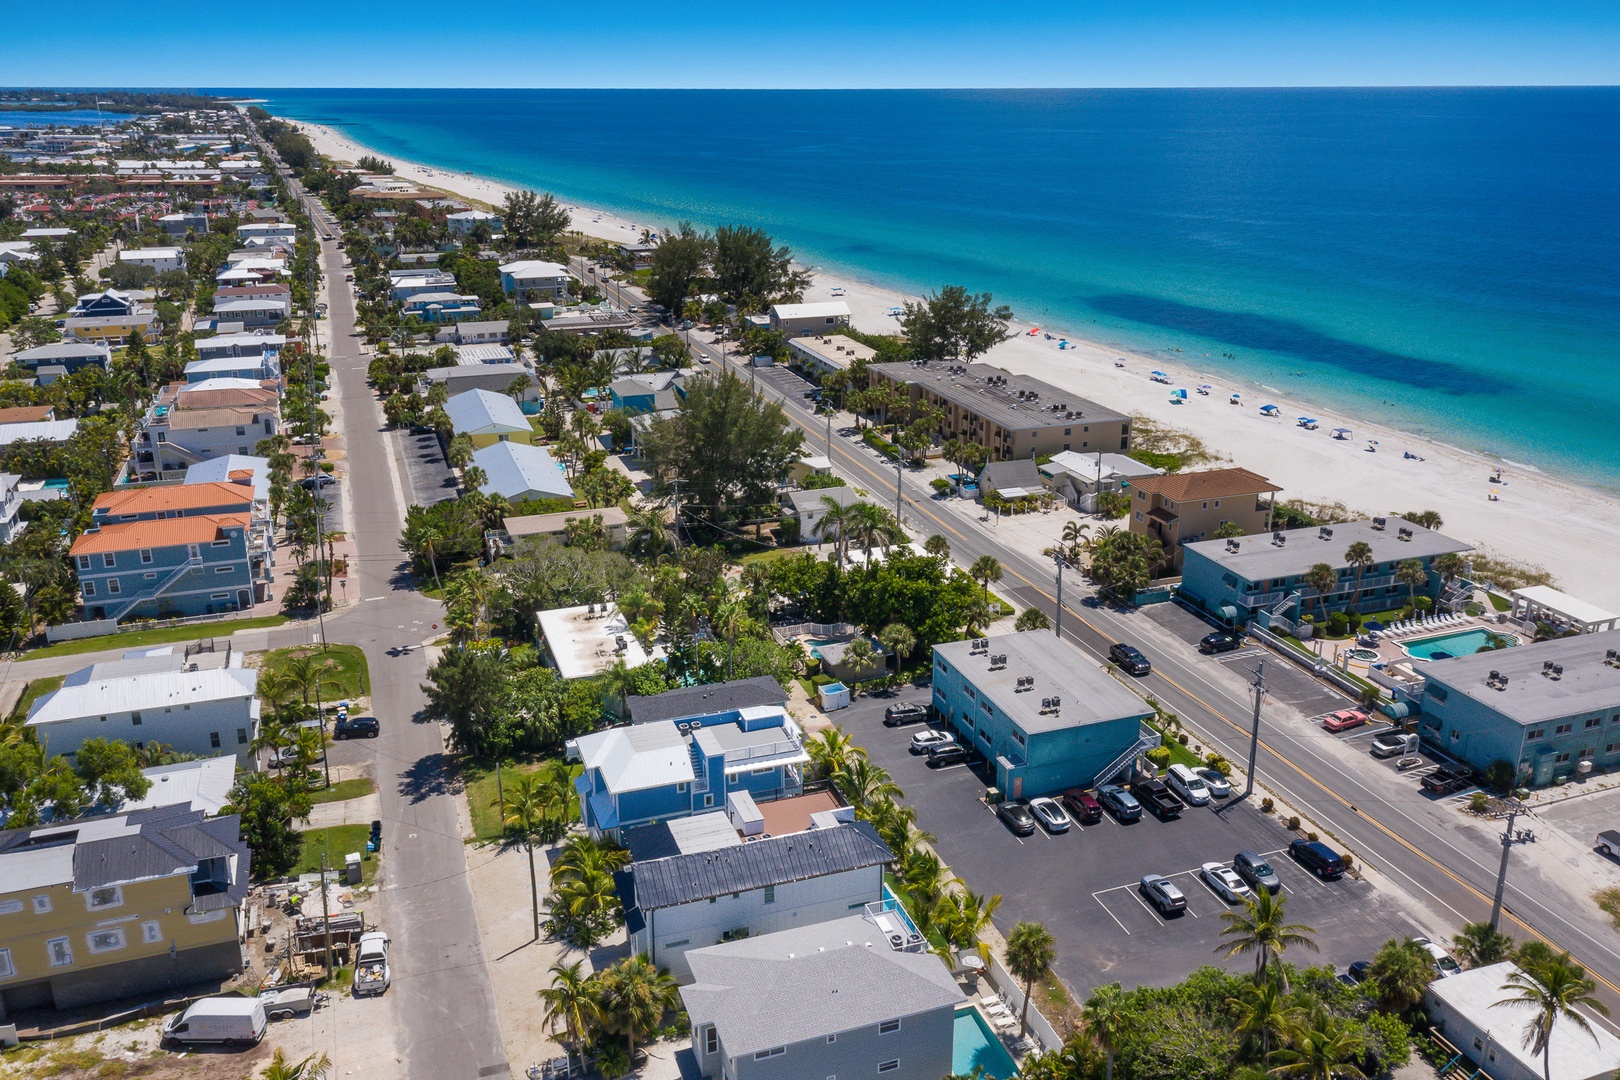 What A Catch - By Anna Maria Island Accommodations (7)